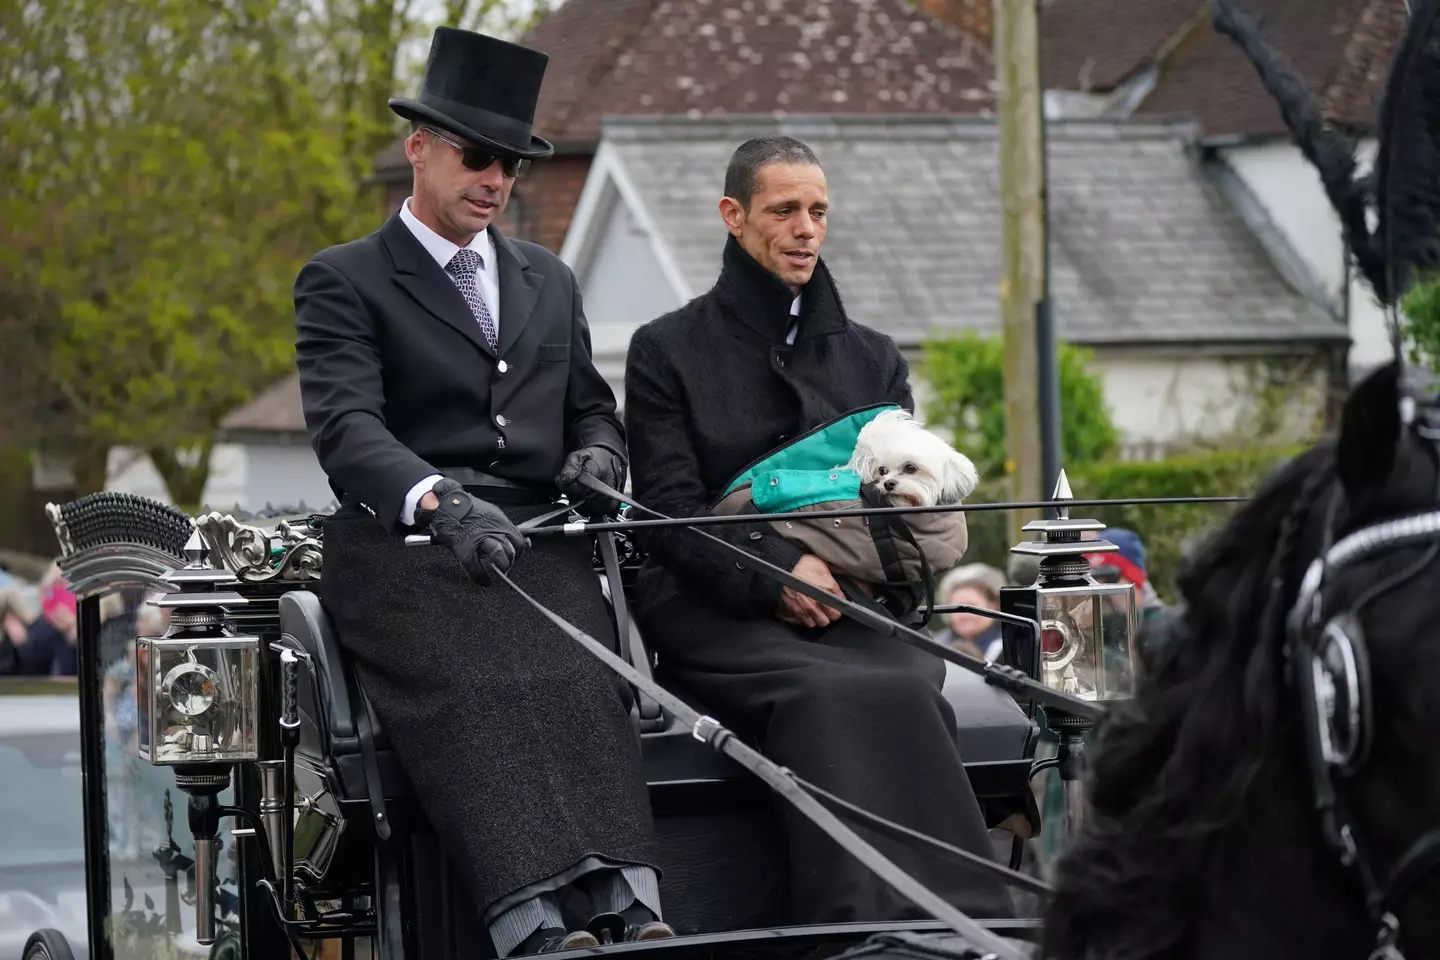 O' Grady's funeral procession was led by his husband Andre Portasio